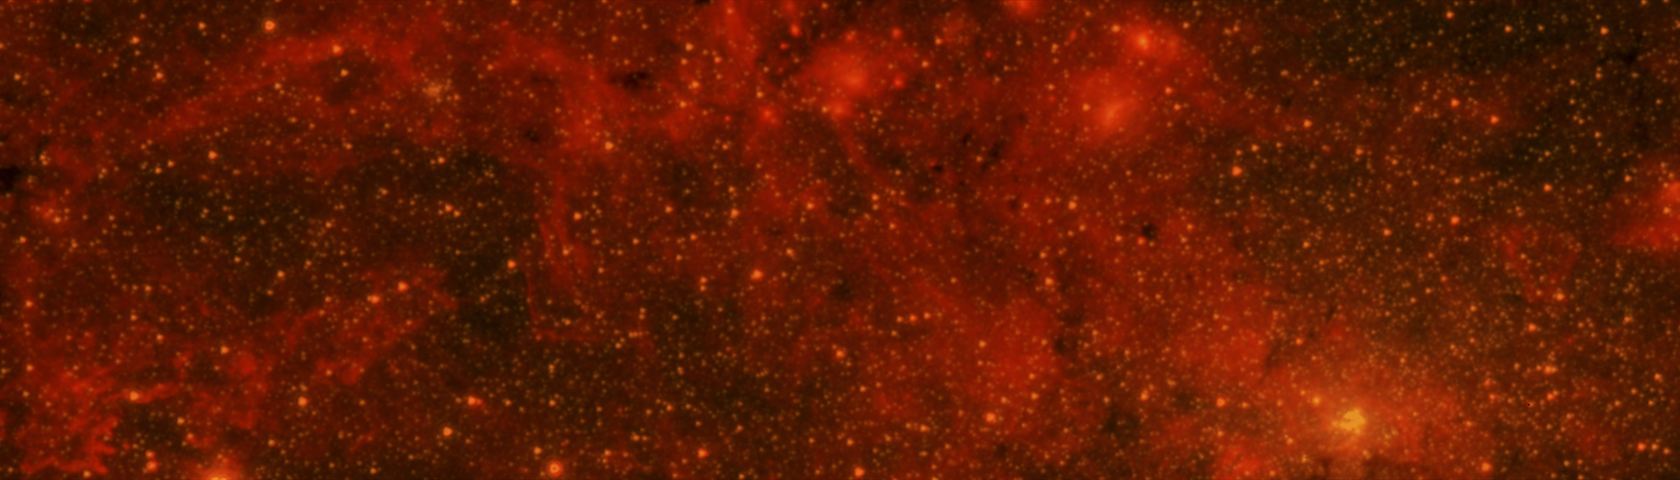 Milky Way in Infrared